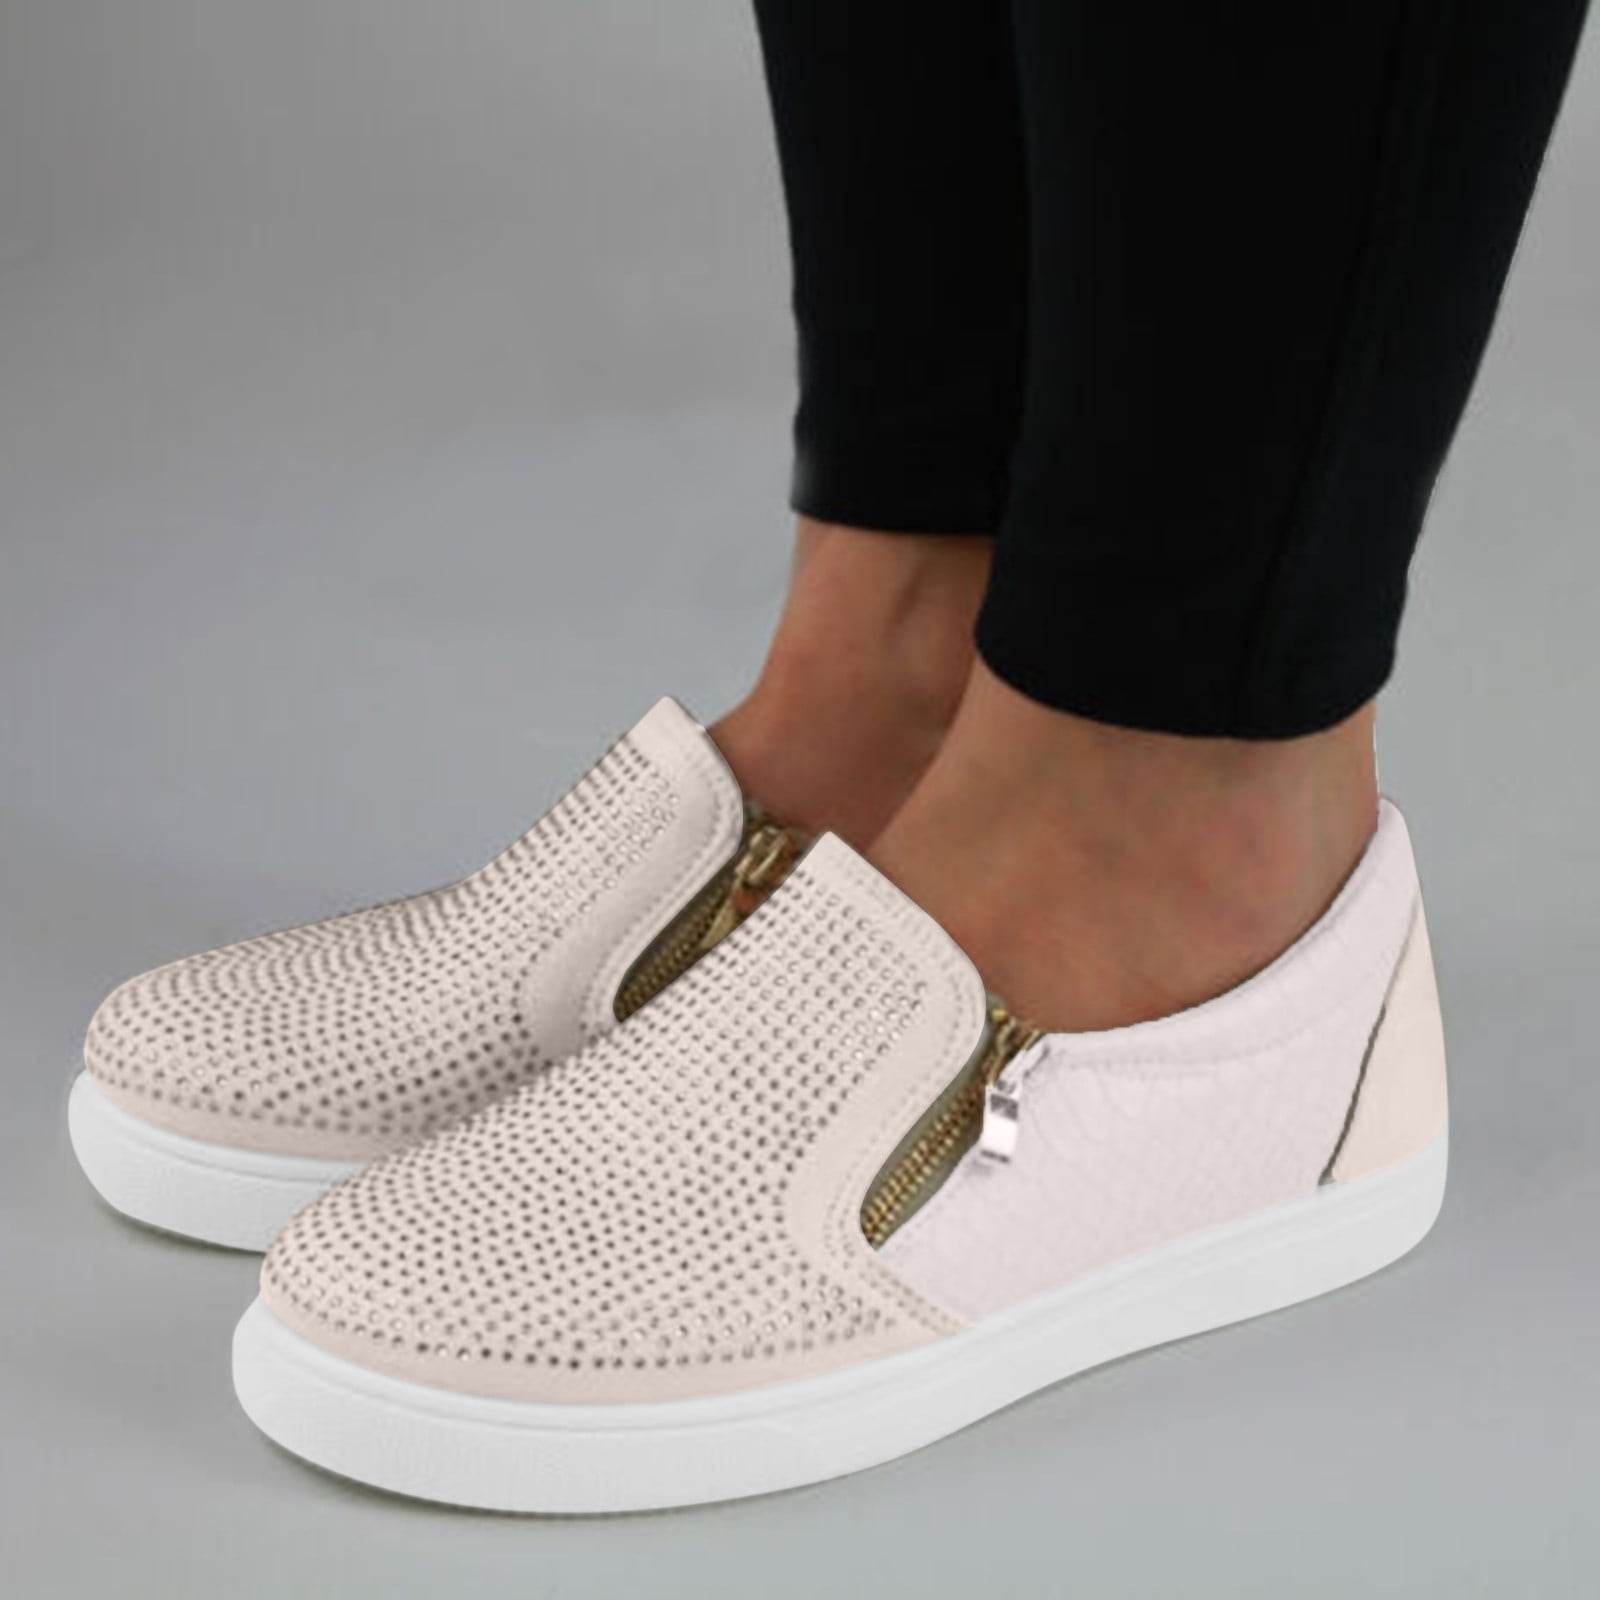 New Womens Casual Sneakers Flat Slip On Diamante Zip Trainers Pumps Shoes Sizes